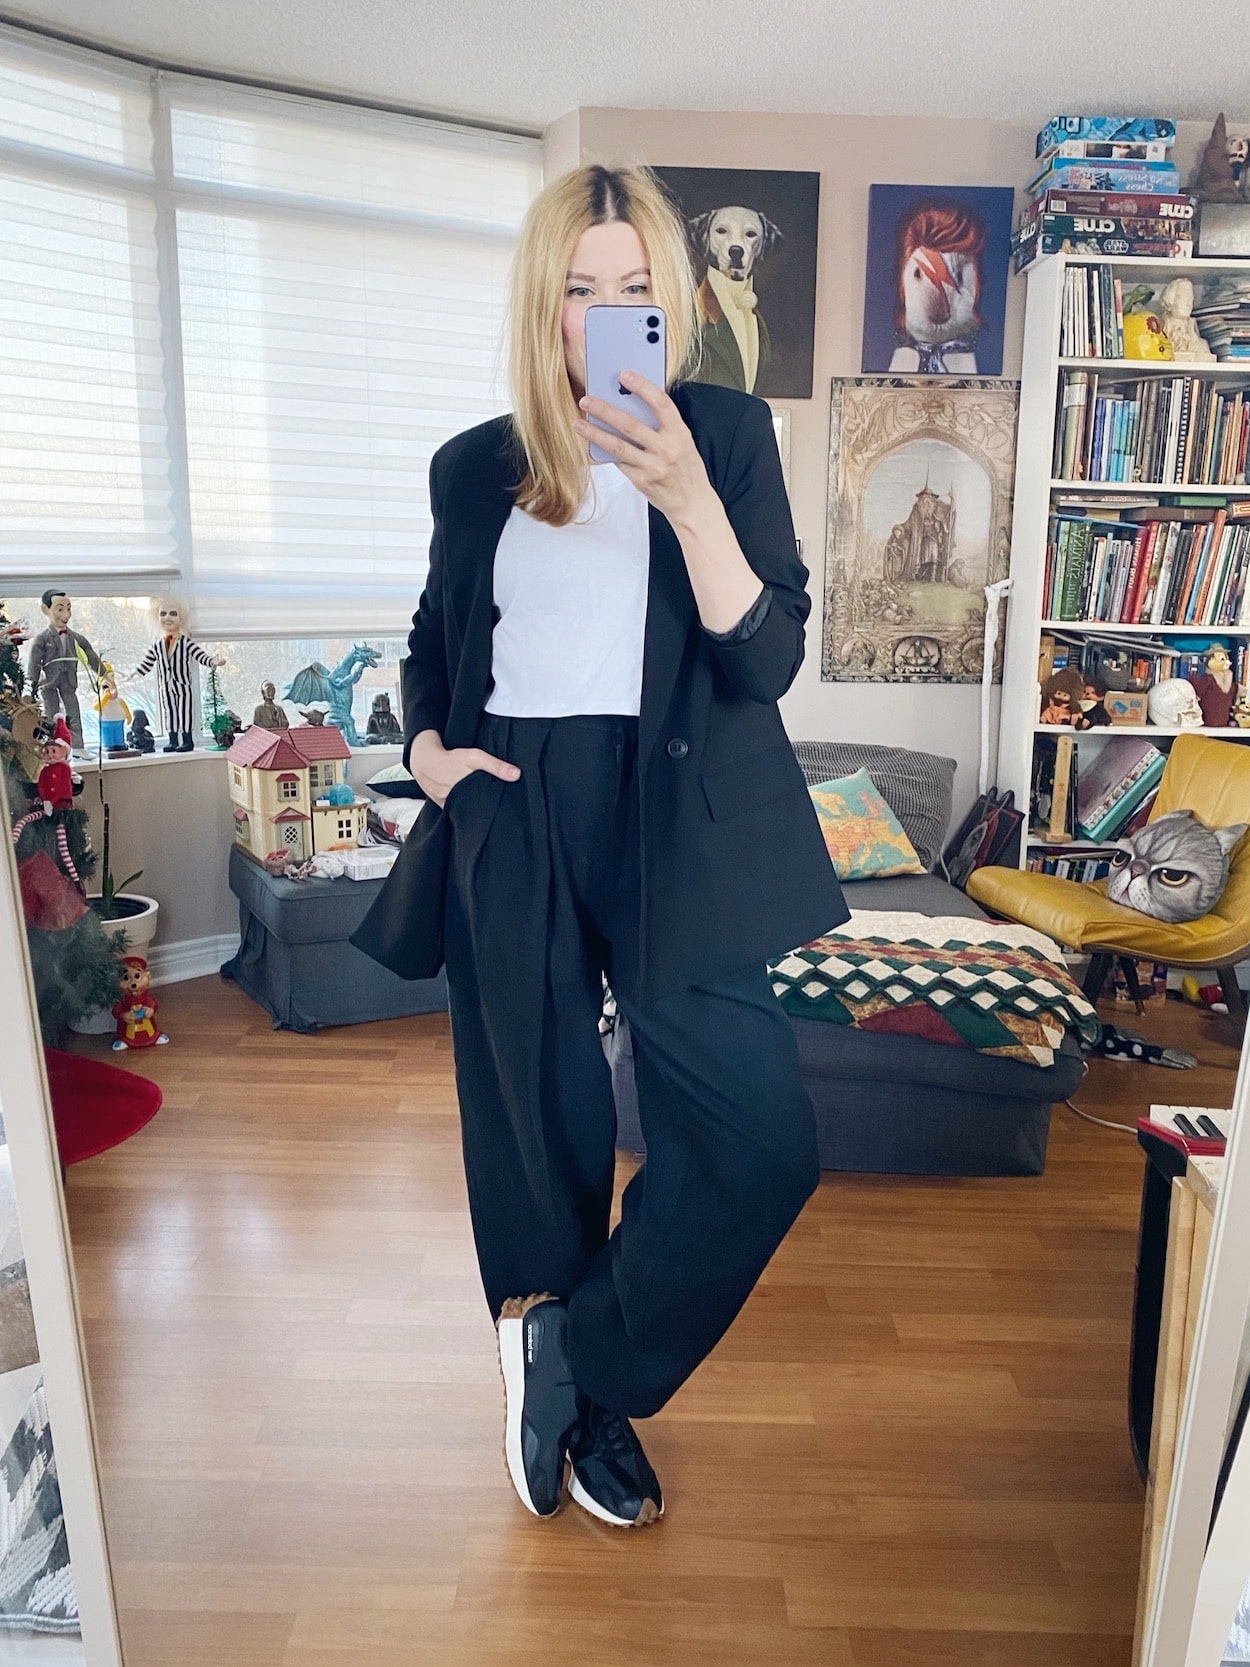 I am wearing trousers, a crop top, and oversized black blazer, and New Balance sneakers.